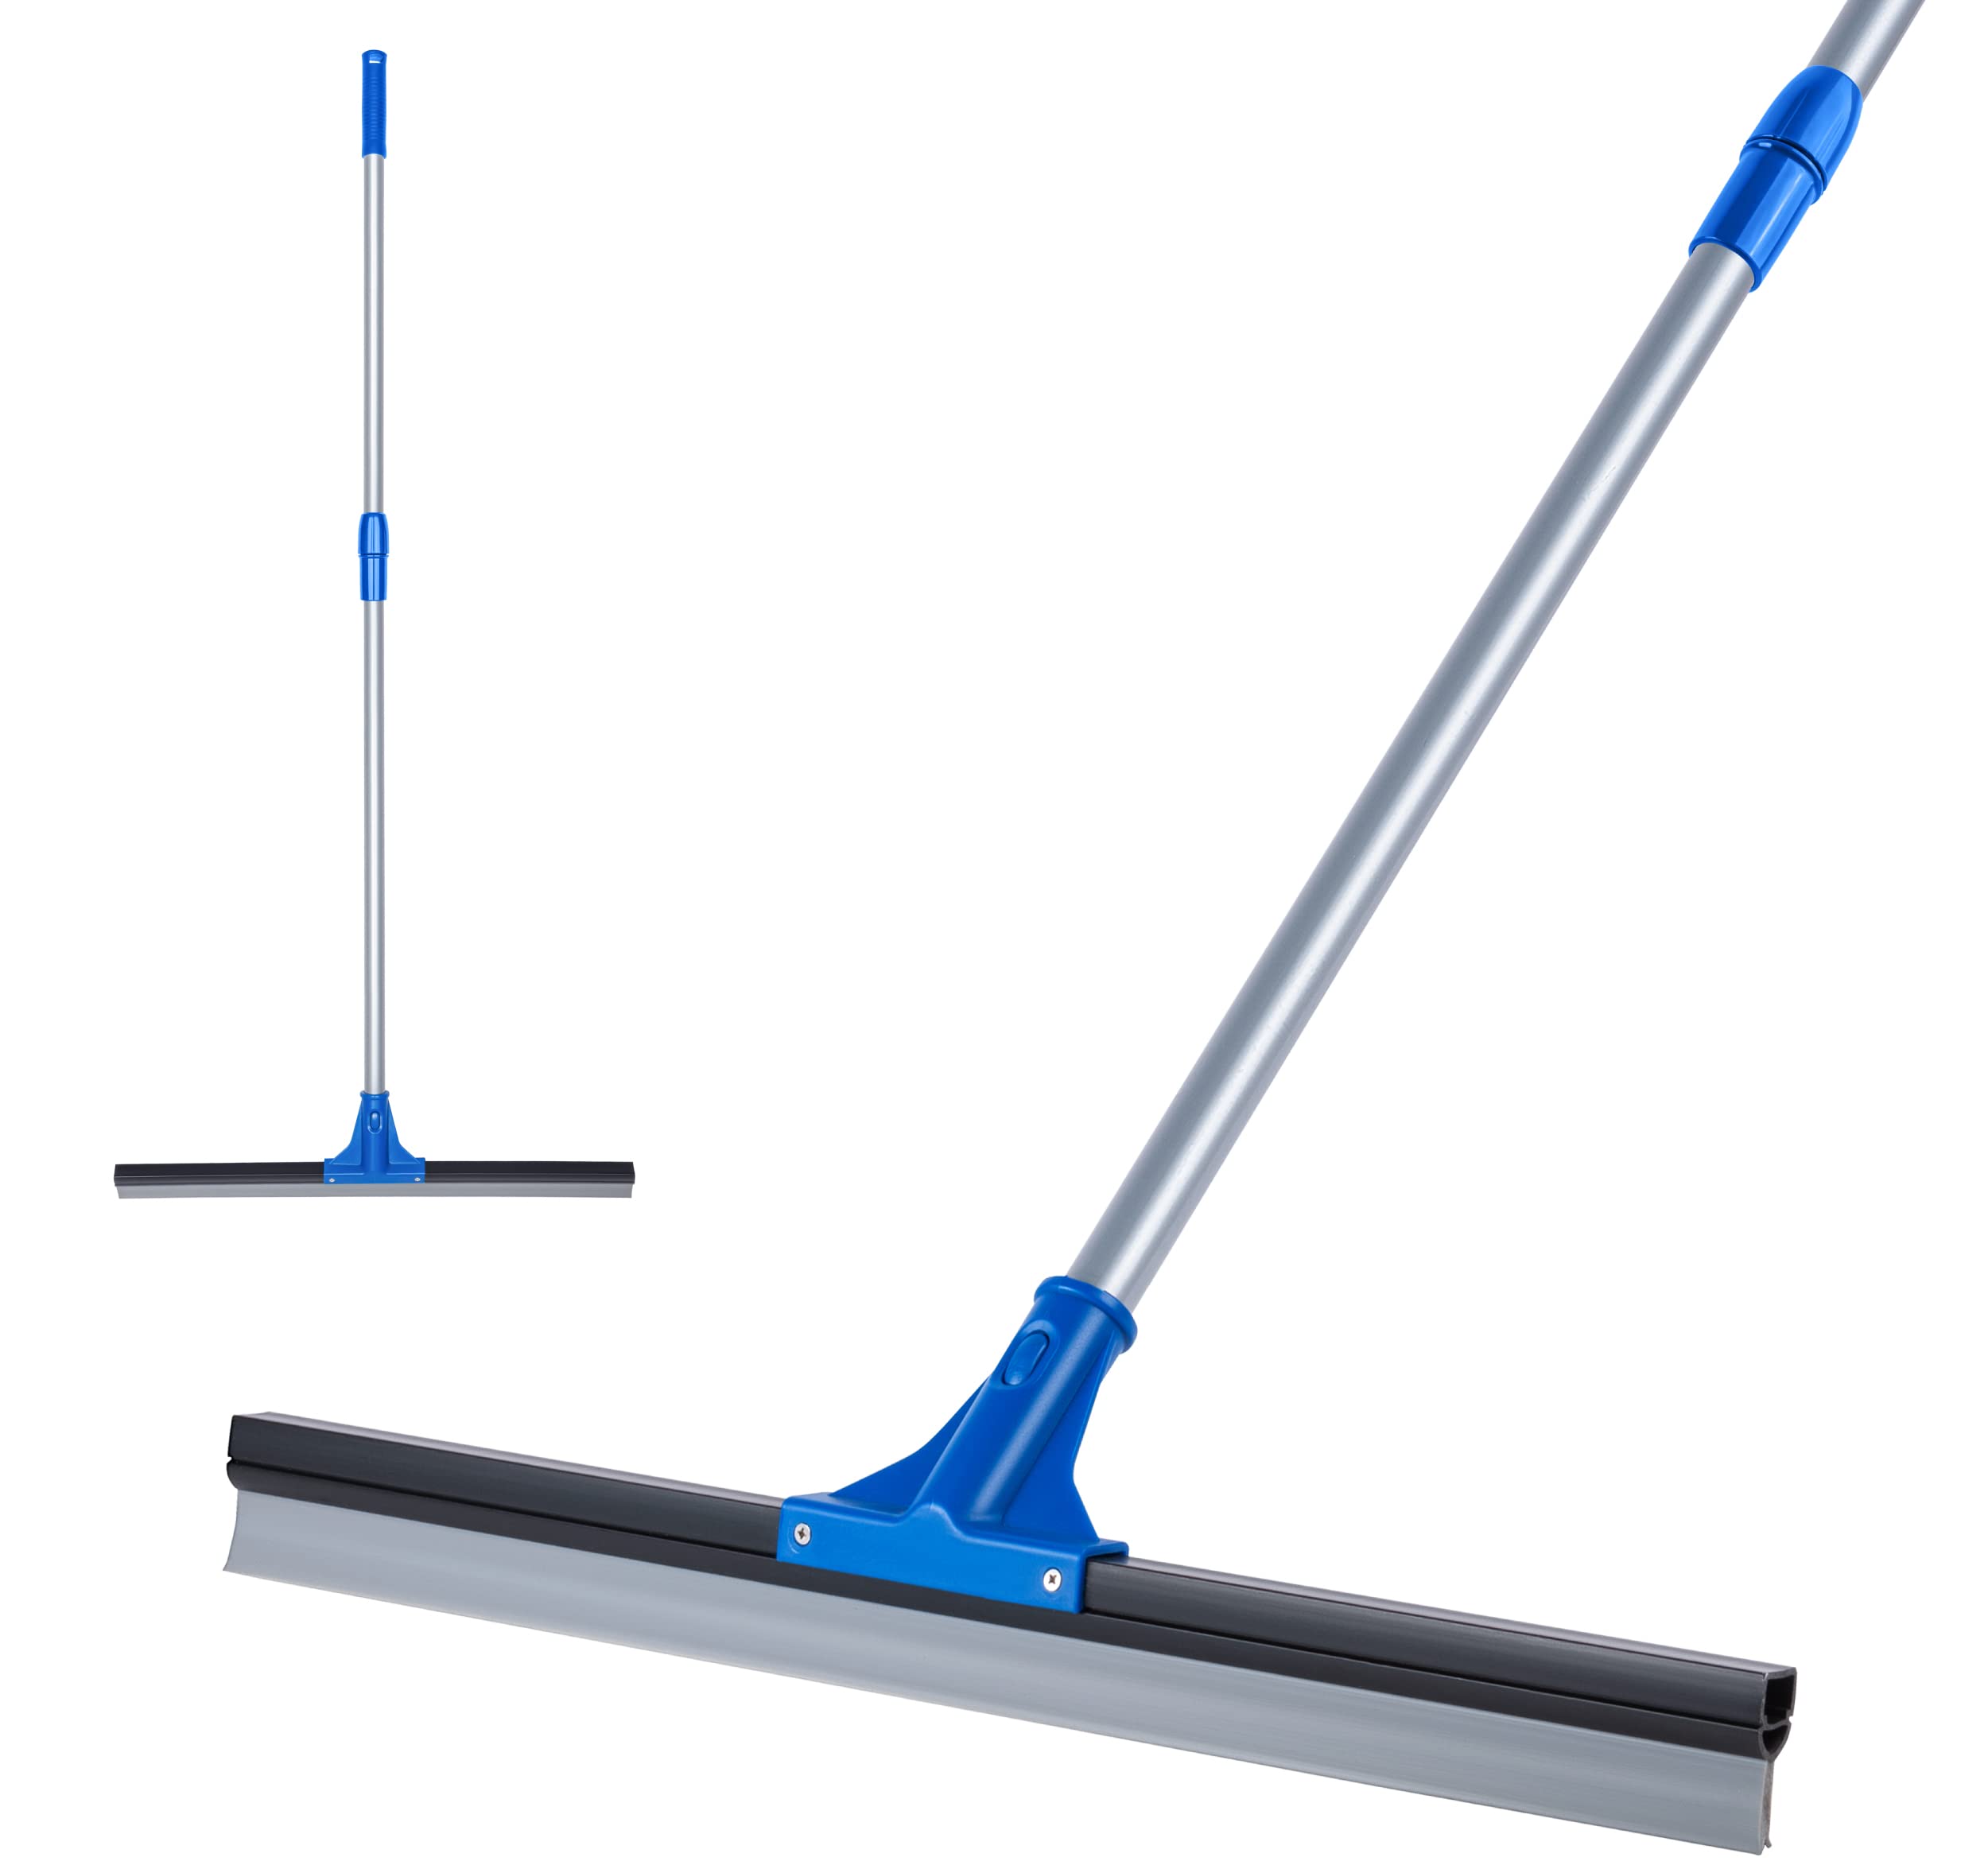 DSV Standard Professional Floor Scrubber Squeegee | Rubber Broom 75 cm (30”) Solid Natural Silicone Rubber Blade - 130 cm (51”) Long Steel Pole -Best for Shower Glass/Garage/Windshield/Window